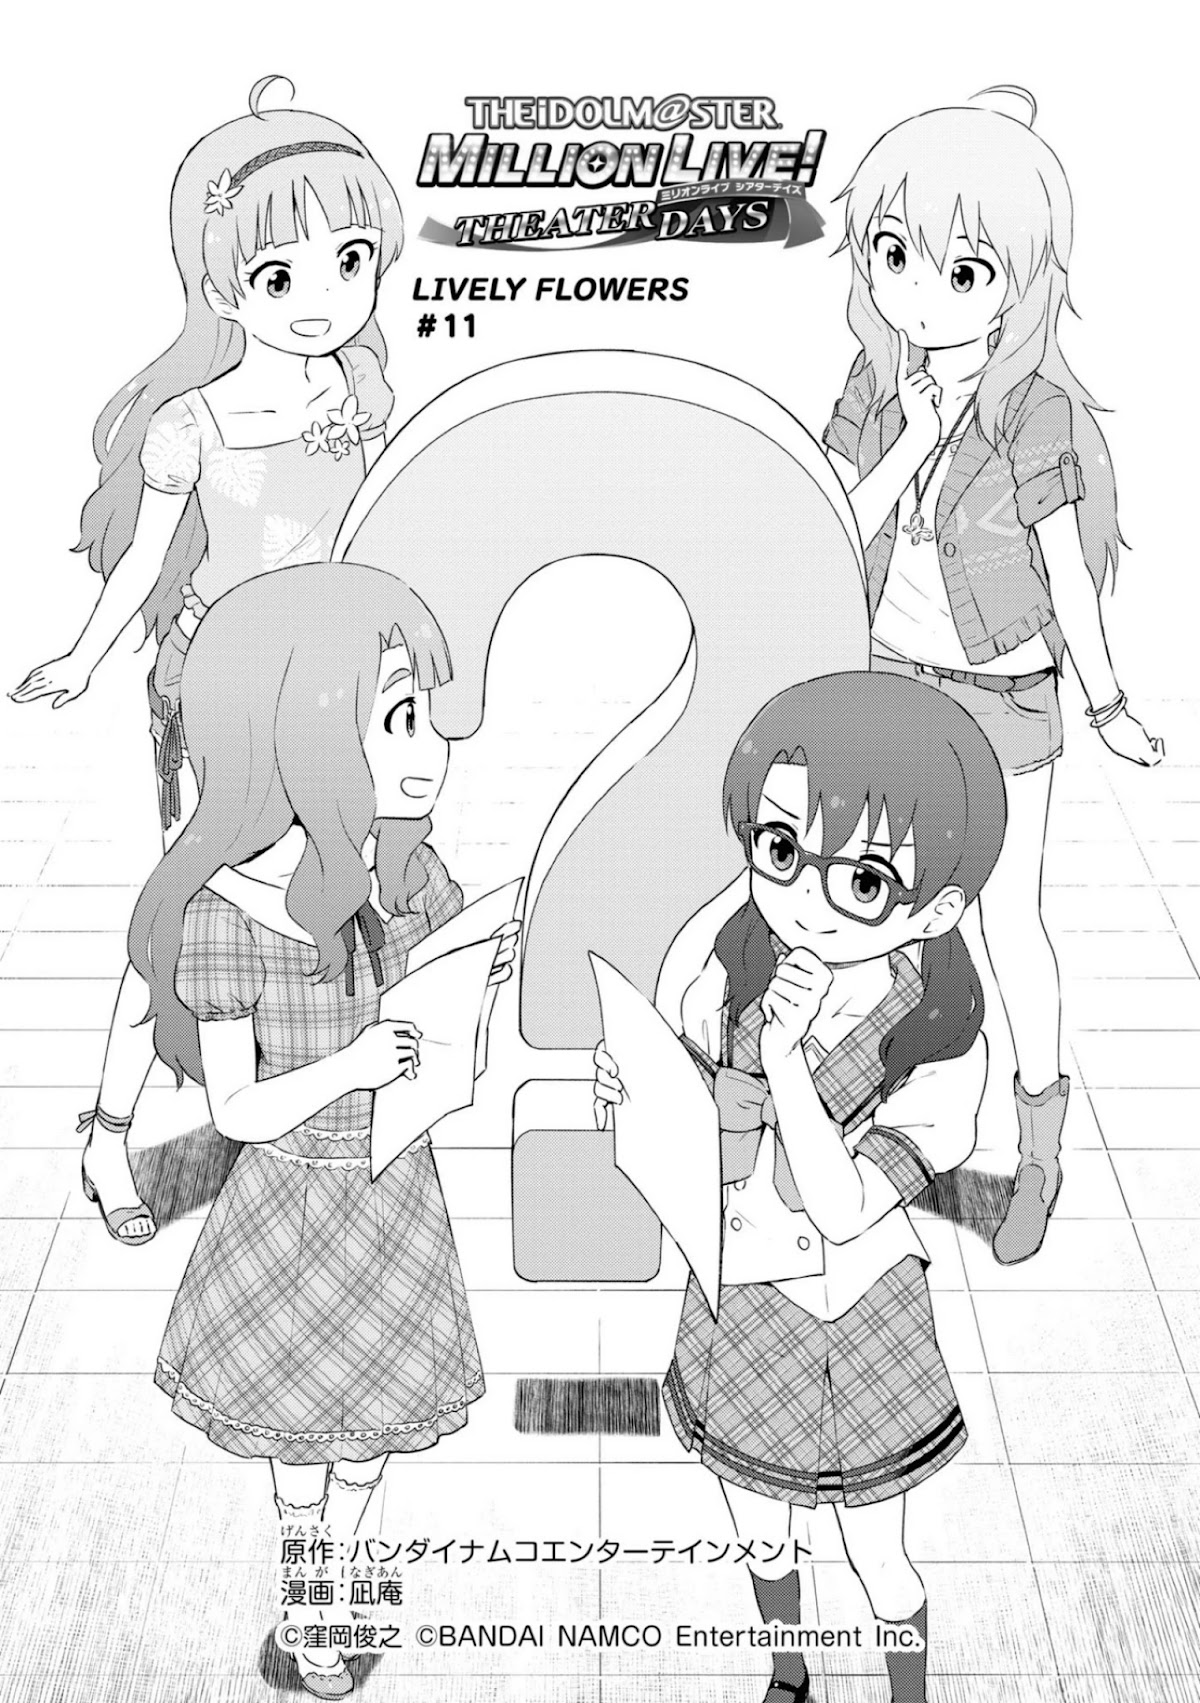 The Idolm@ster Million Live! Theater Days - Lively Flowers Chapter 11 #1